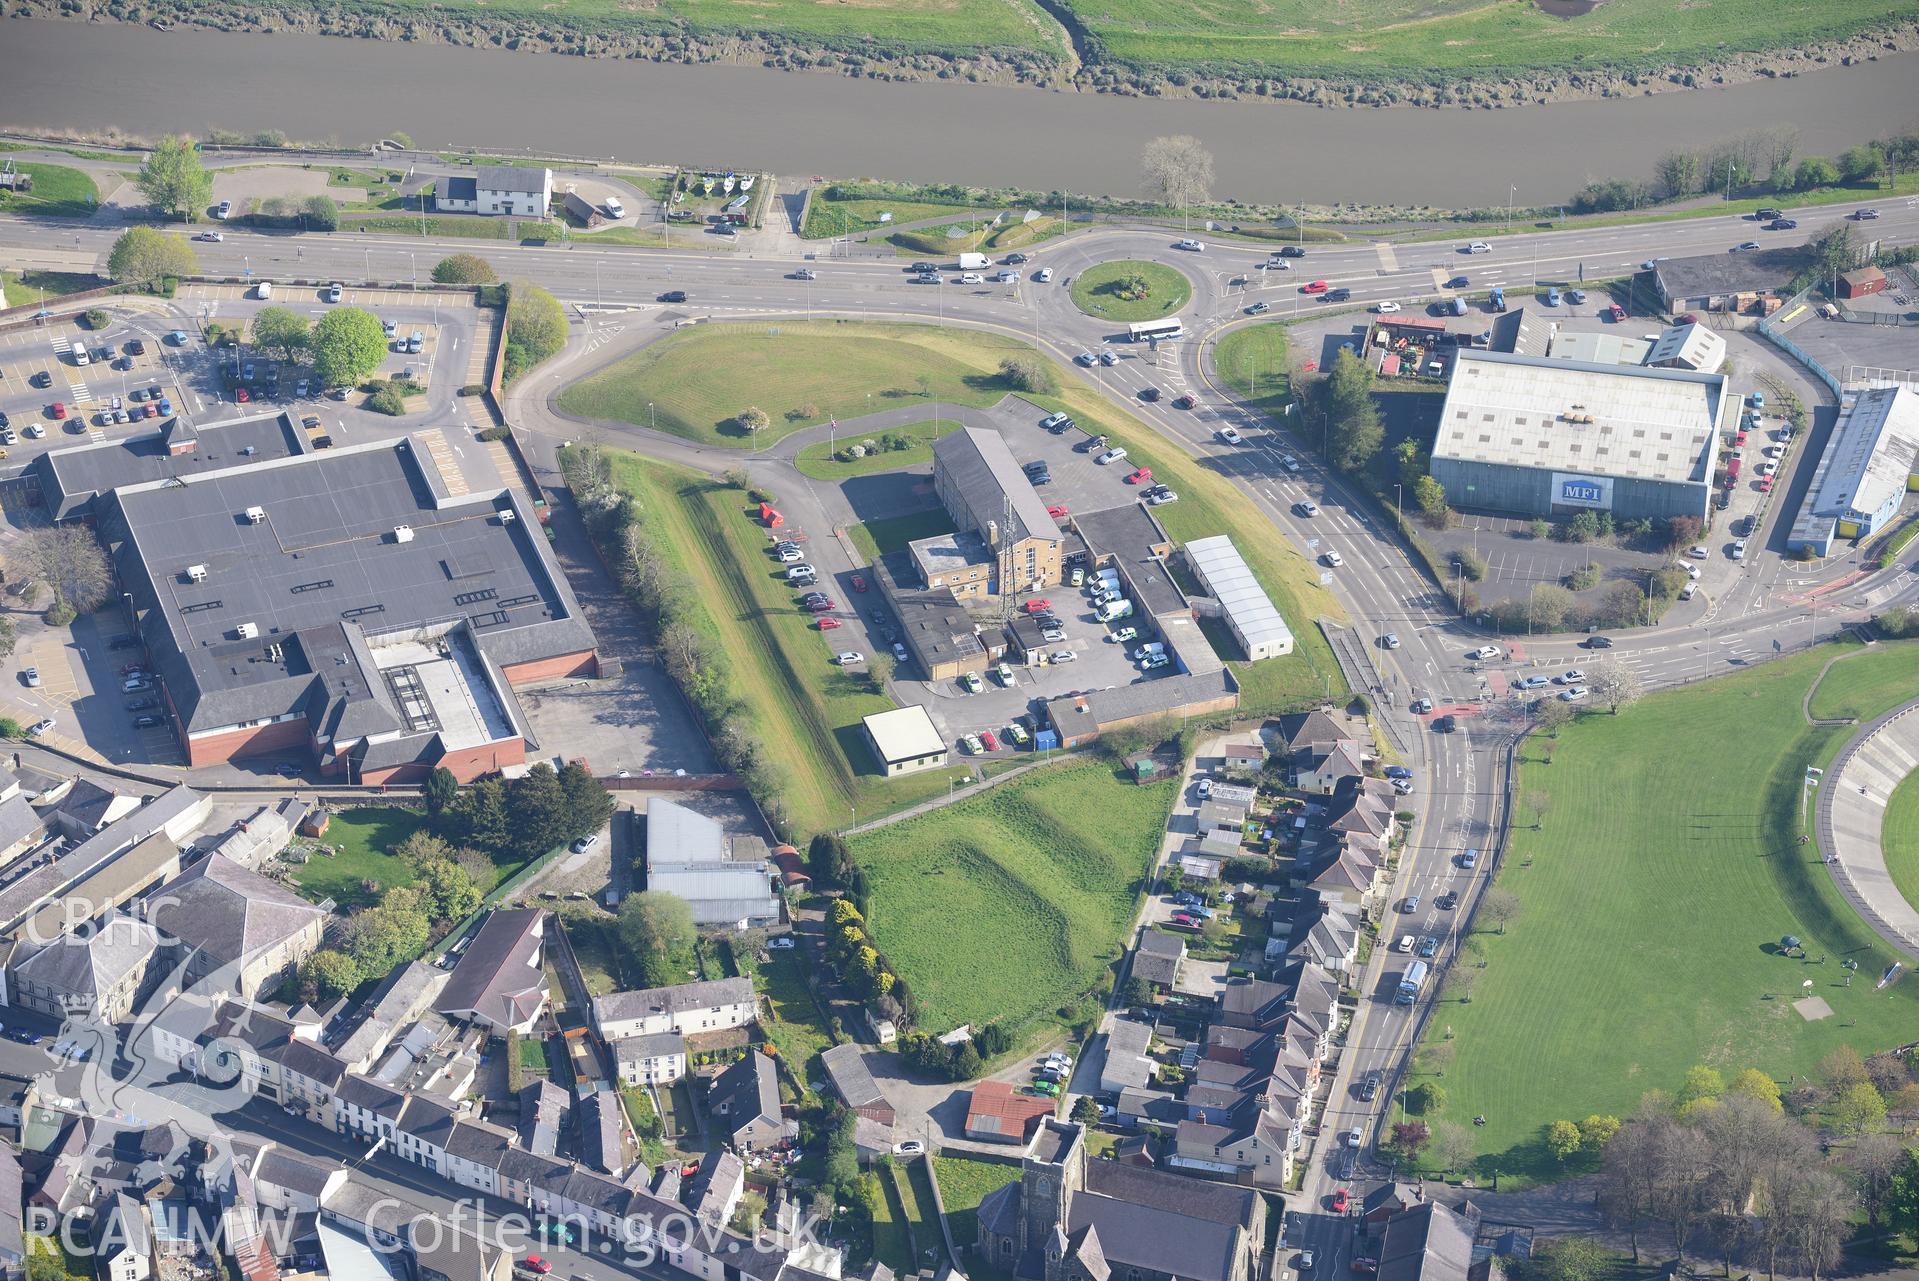 Carmarthen including the Bulwarks, including view of harbour, bridge, castle, gaol and quay. Oblique aerial photograph taken during the Royal Commission's programme of archaeological aerial reconnaissance by Toby Driver on 21st April 2015